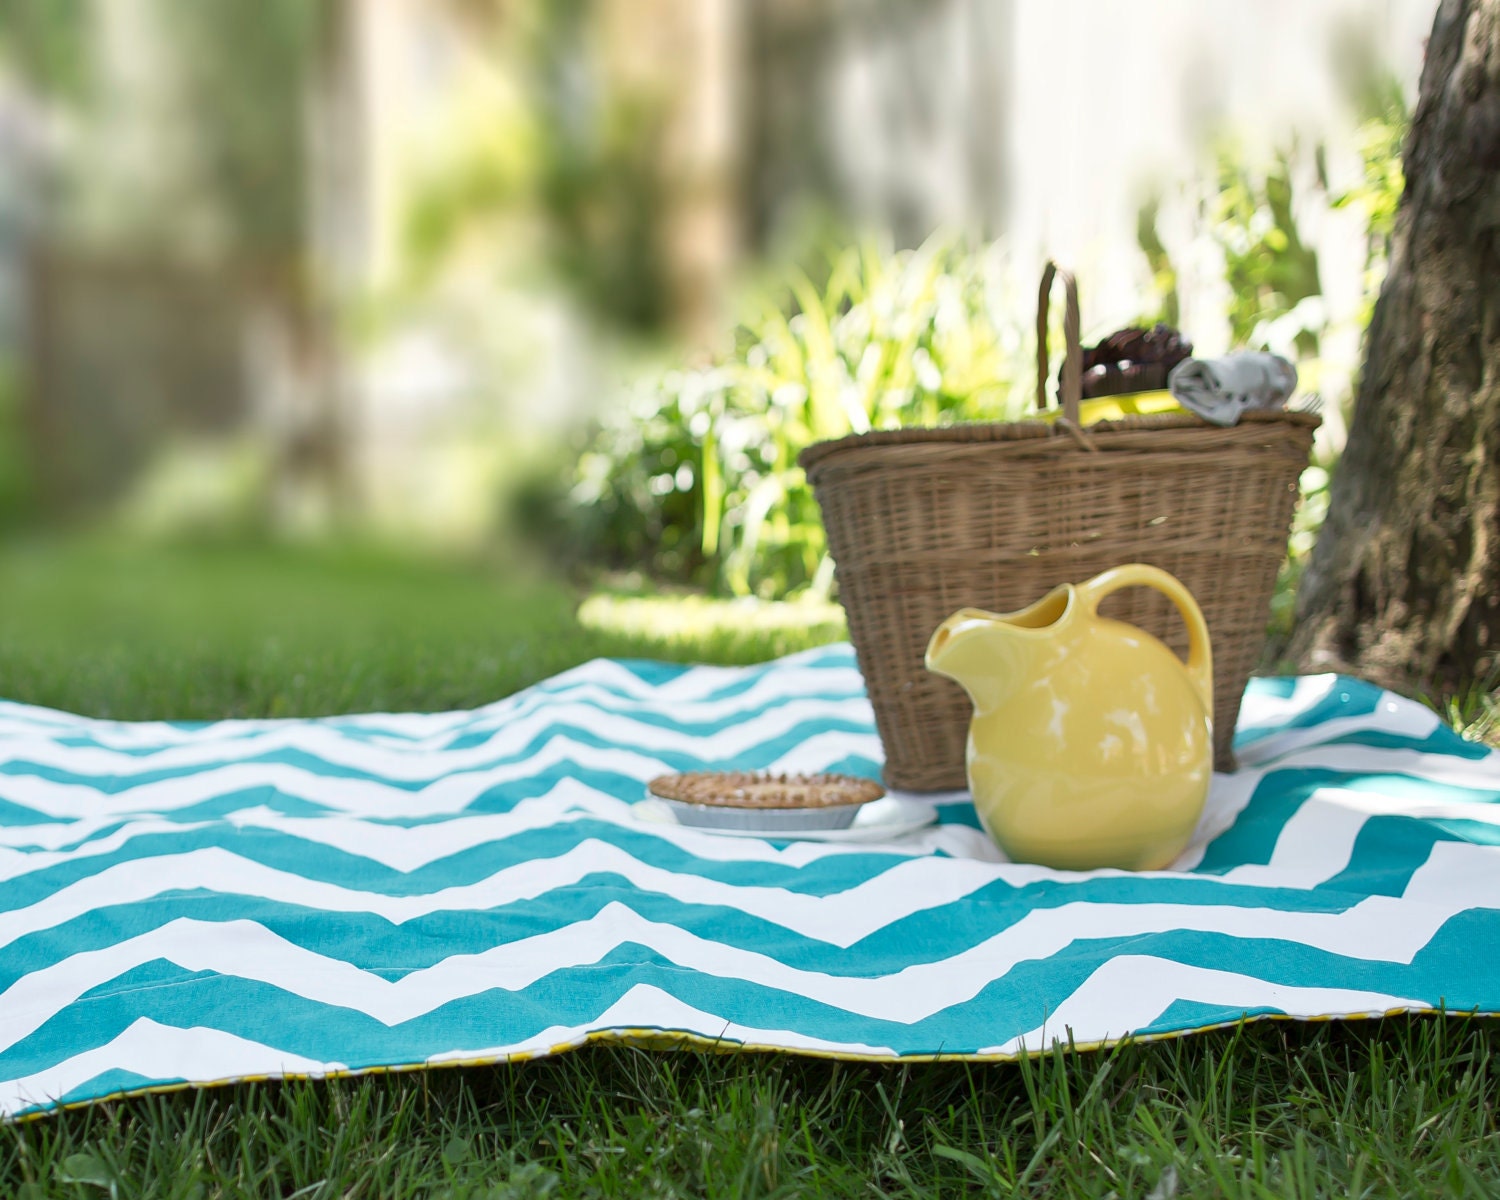 Waterproof Picnic Blanket in Geometric Chevron Teal Green - Eco Friendly Summer Portable Outdoors Family Beach Blanket (Ready to Ship) - SewnNatural